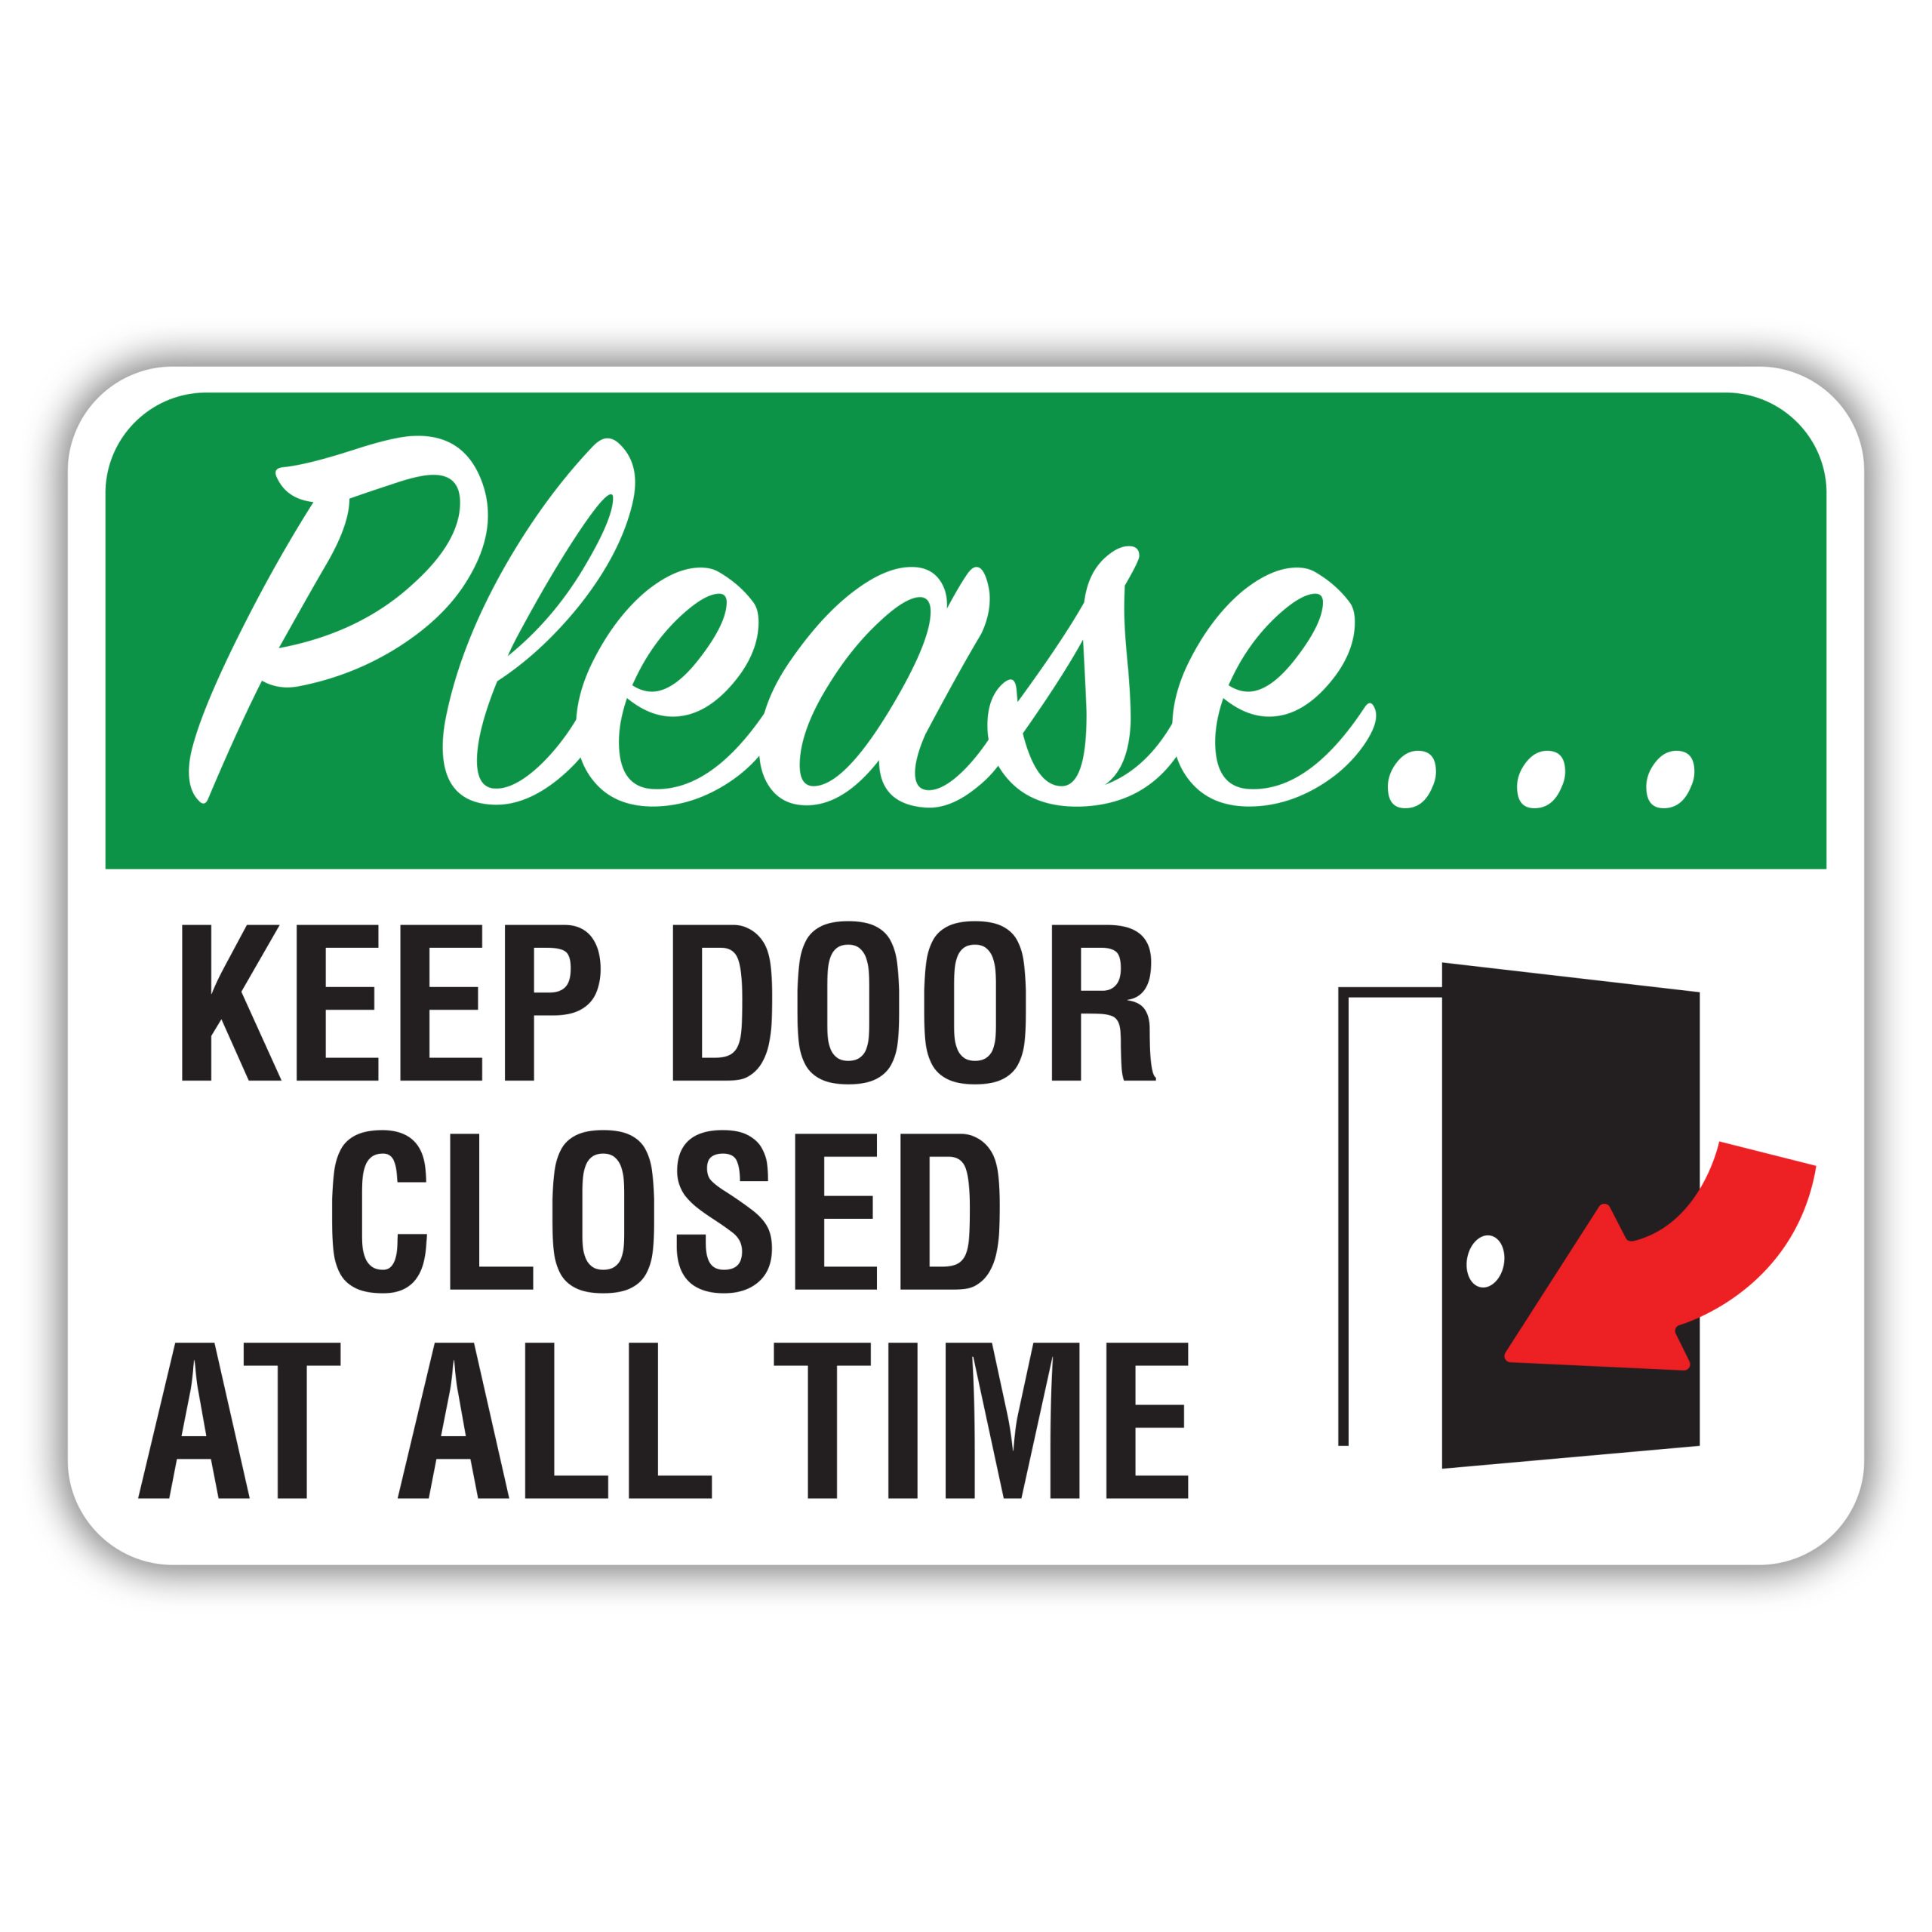 PLEASE... KEEP DOORS CLOSED AT ALL TIME American Sign Company